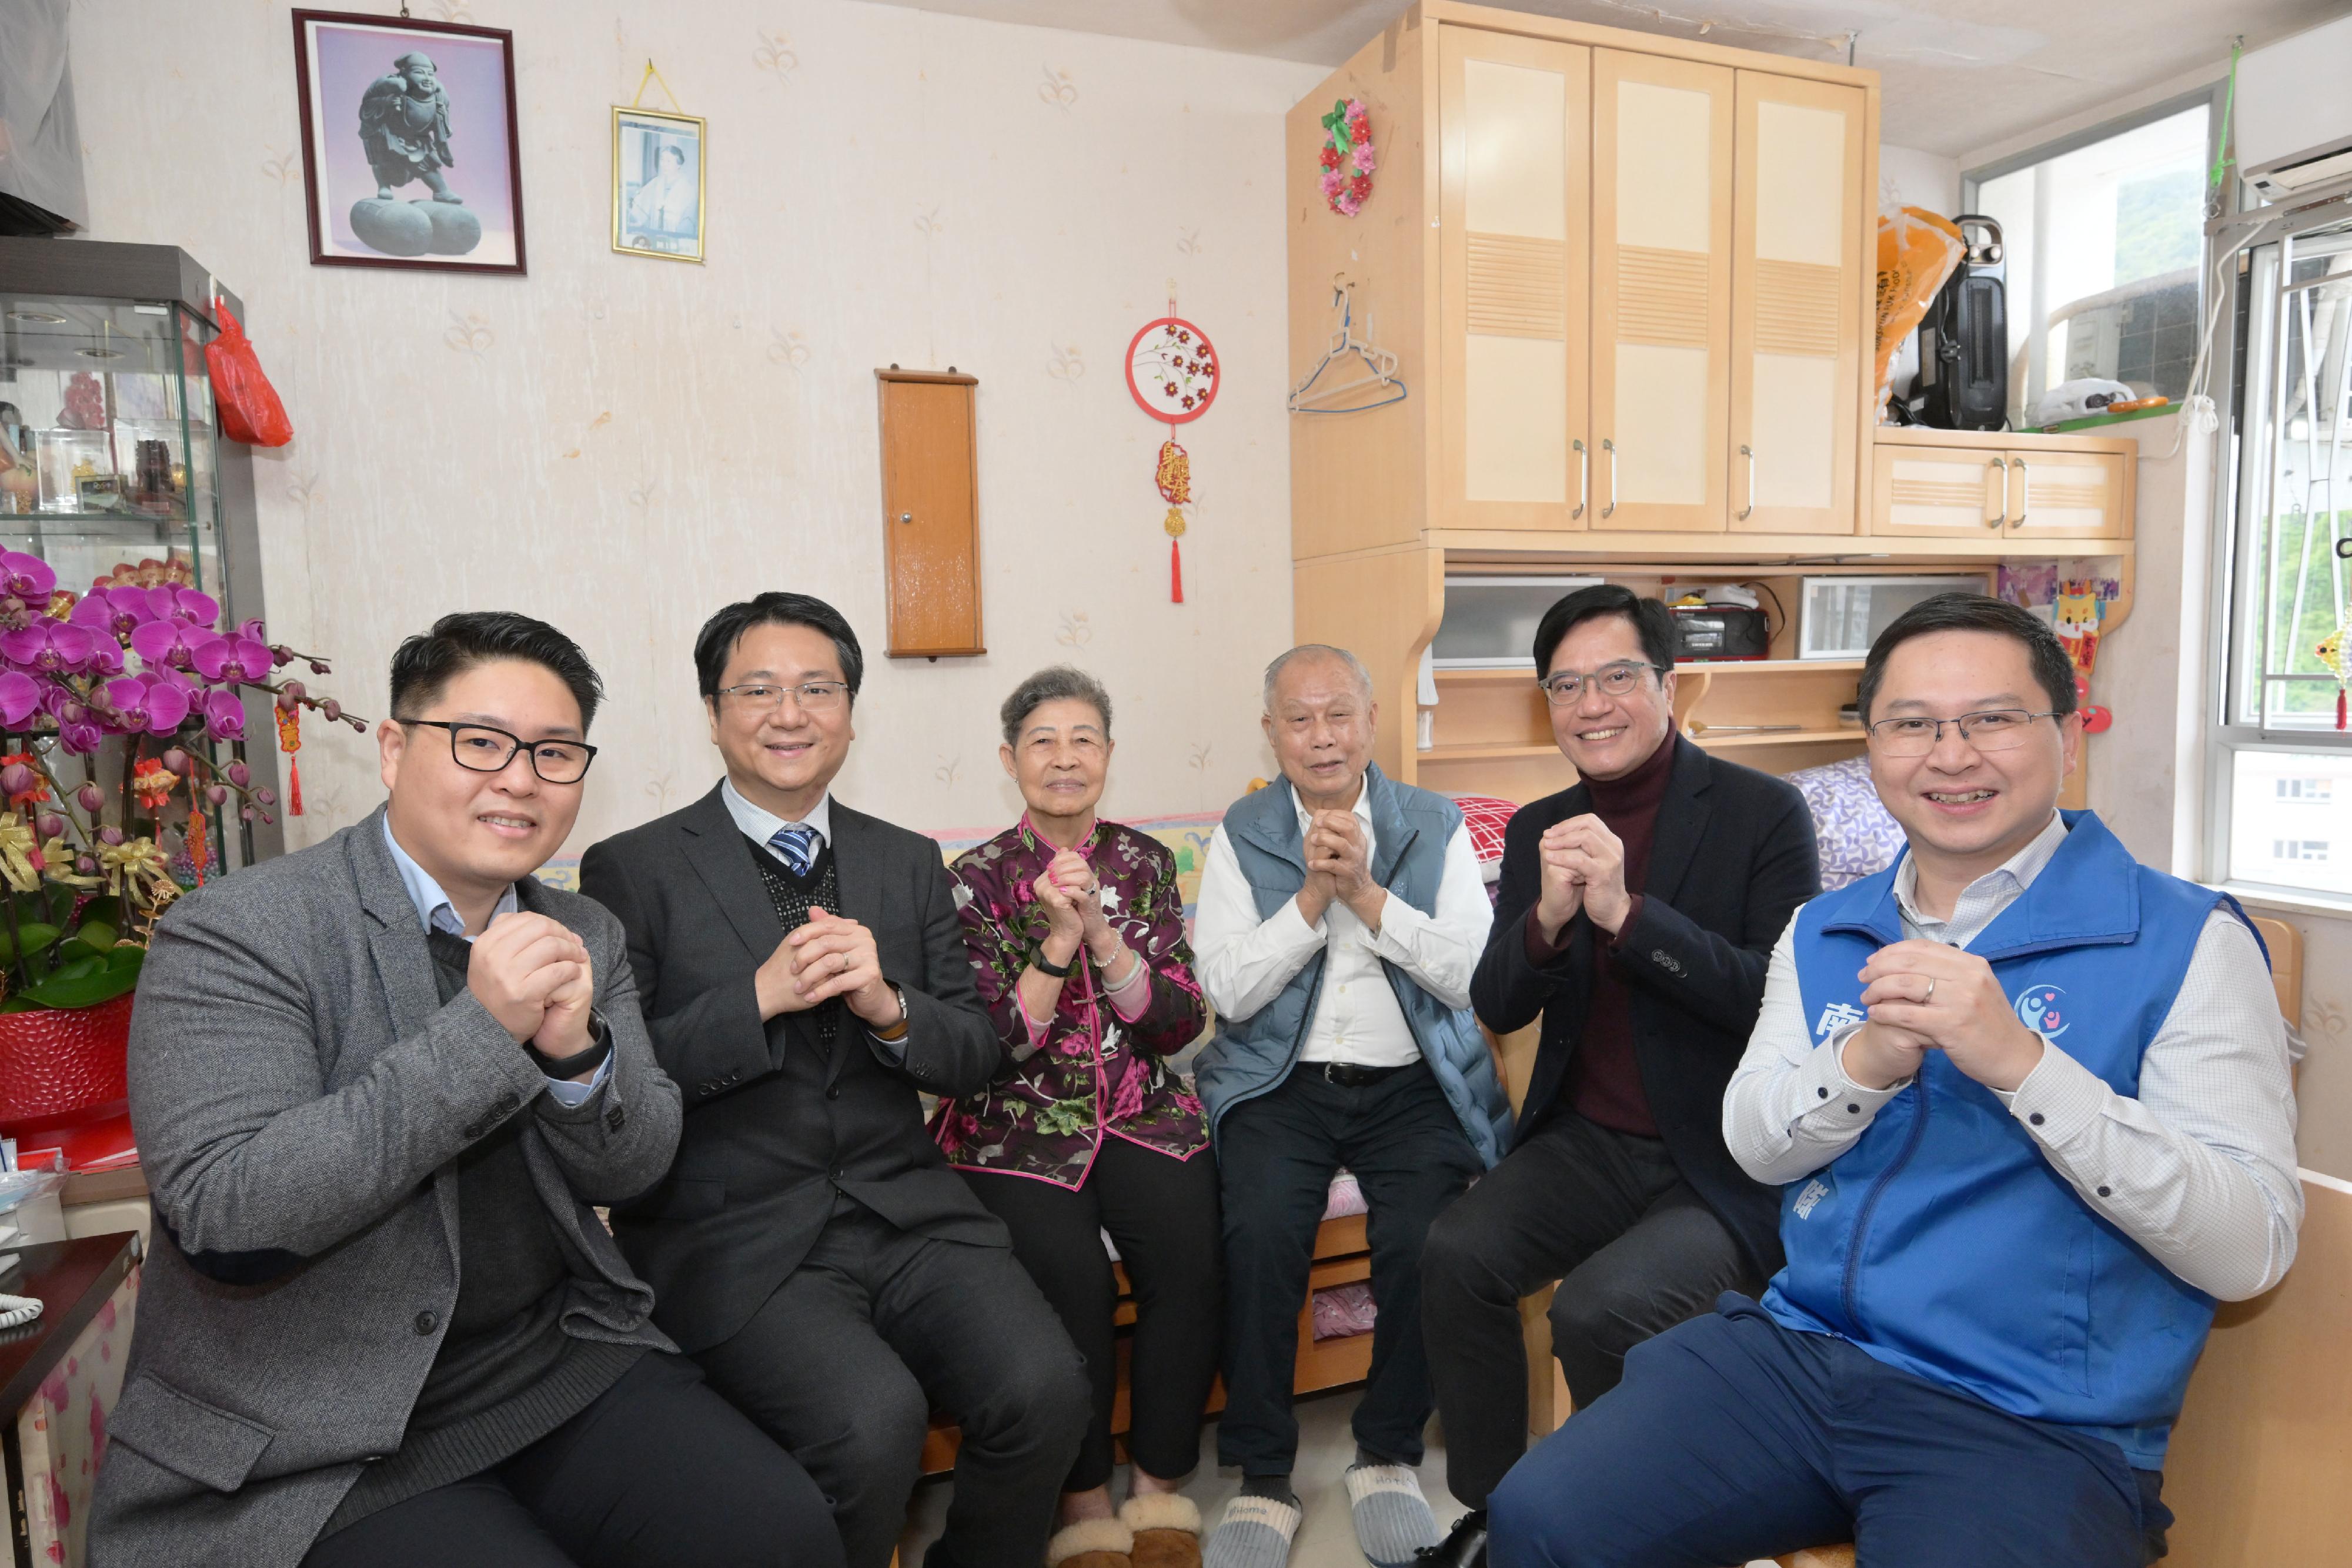 The Deputy Financial Secretary, Mr Michael Wong (second right), accompanied by the District Officer (Southern), Mr Francis Cheng (second left), with Southern District Council member Mr Pang Siu-kei (first left) and representative of Care Team (Southern) Mr Roy Chu (first right), visit Mr and Mrs Sin (third right and third left) in Shek Pai Wan Estate, Southern District, today (February 8).